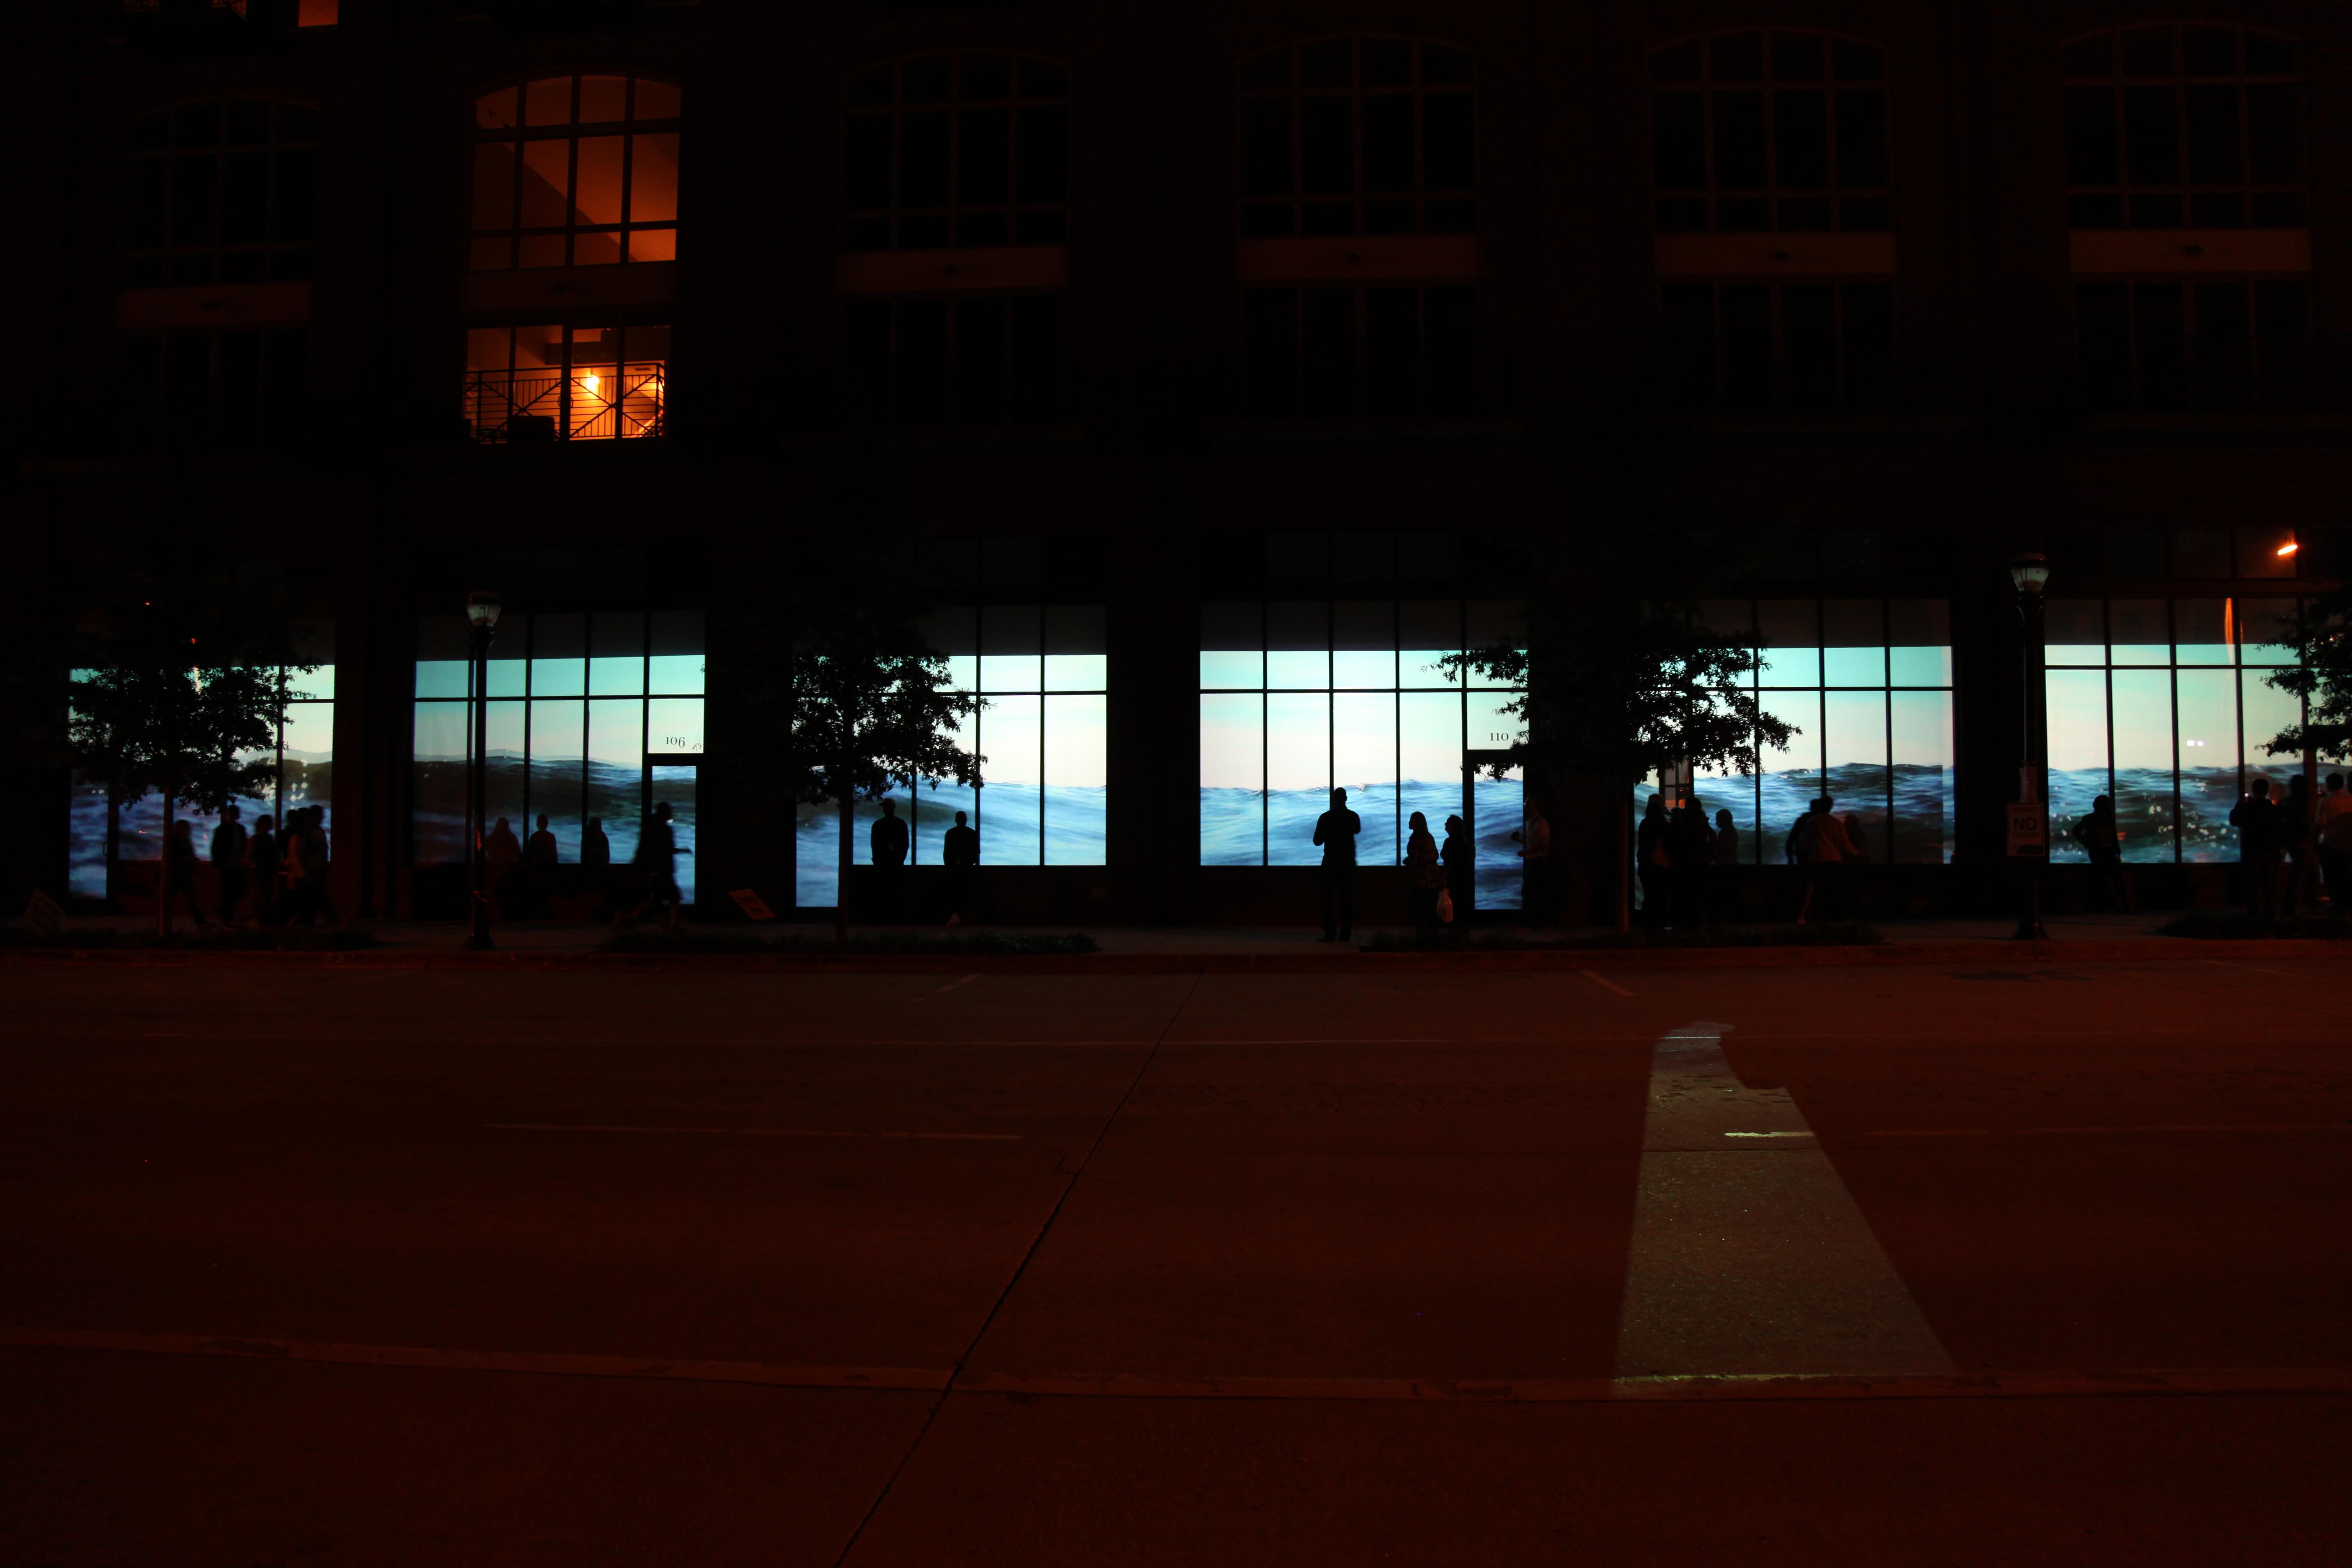 Small thumbnail image of Nighttime photograph of a large commercial center with six of its street-level storefront windows showing a contiguous video projection of water ebbing and flowing.